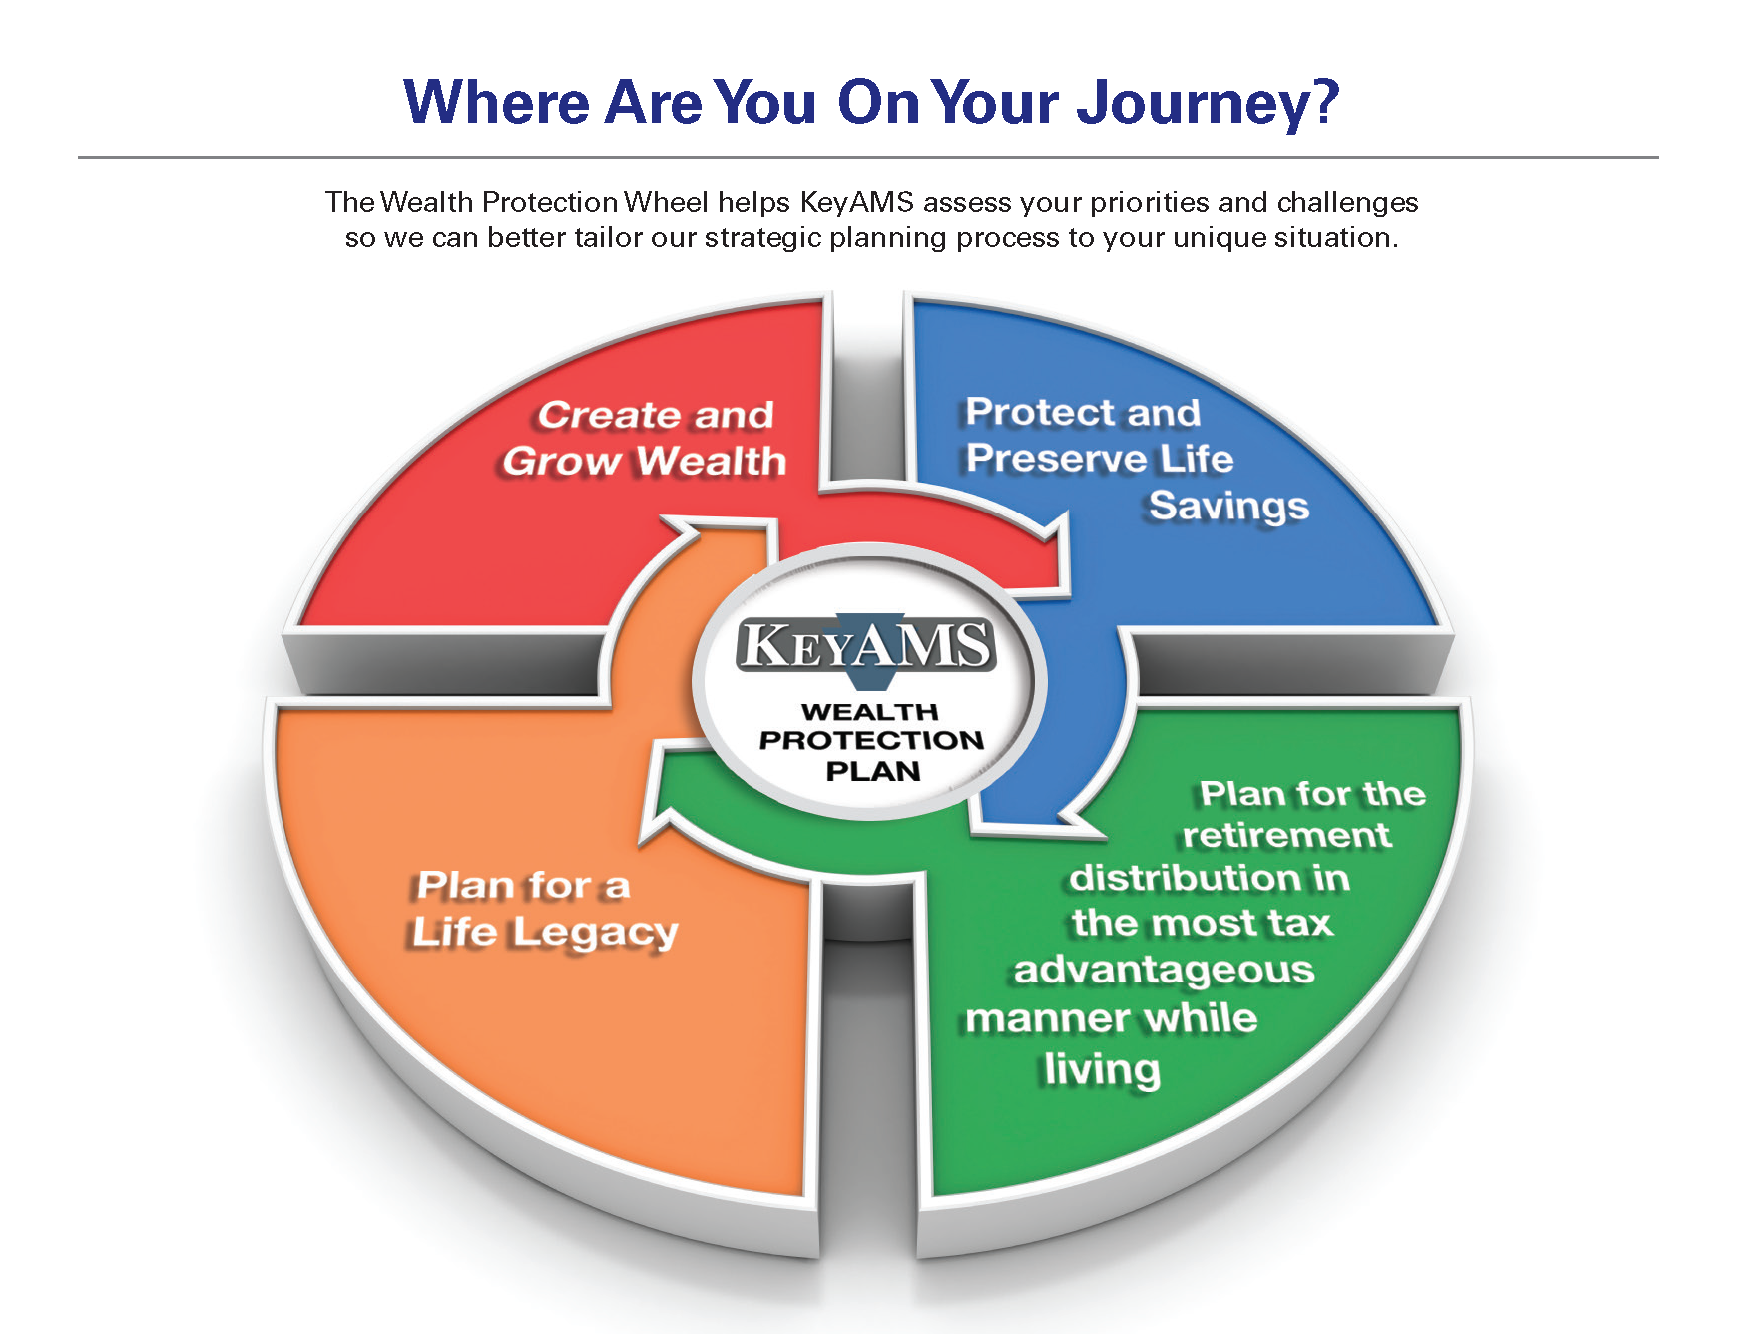 Where Are You On Your Journey? The Wealth Protection Wheel helps KeyAMS assess your priorities and challenges so we can better tailor our strategic planning process to your unique situation. Protect and Preserve Life Savings. Plan for the retirement distribution in the most tax advantageous manner while living. Plan for a Life Legacy. Create and Grow Wealth.